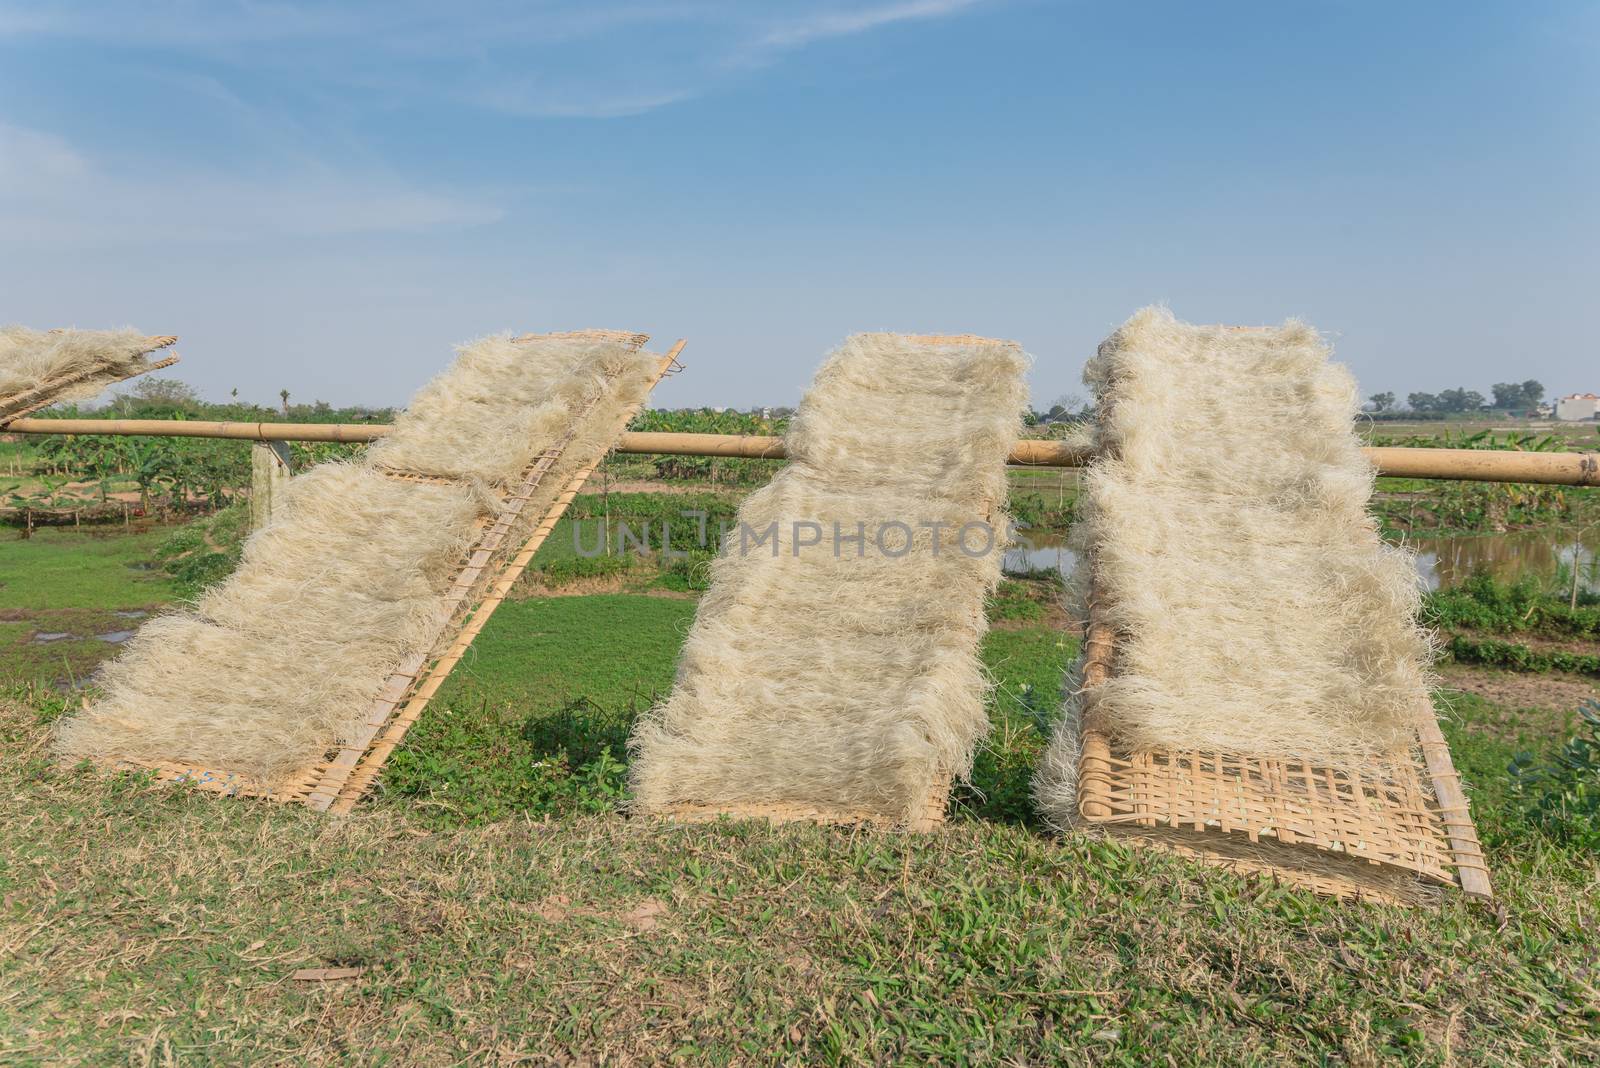 Natural way to dry out Vietnamese rice vermicelli drying in the sunlight on bamboo fences near rural farm outside of Hanoi, Vietnam. Special organic noodles are being dried